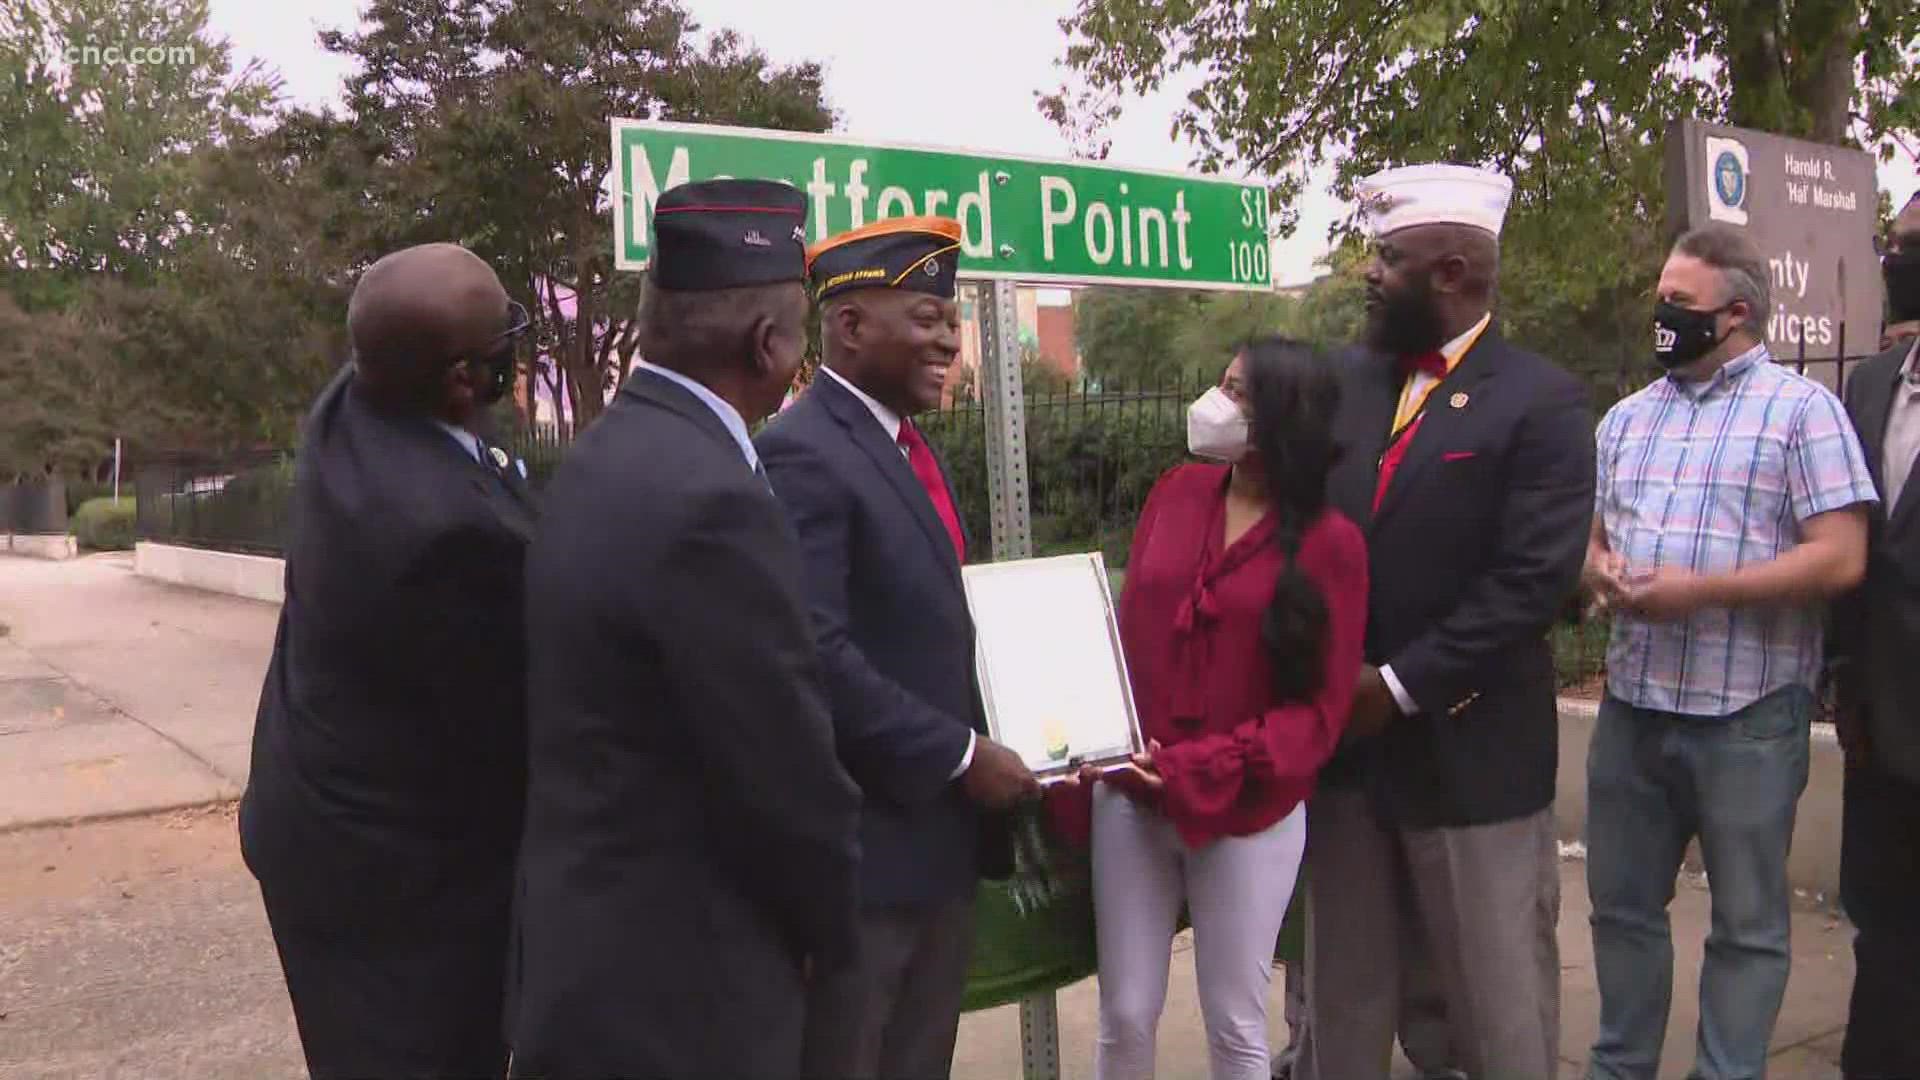 The street is being renamed after the Montford Point Marines, the first African American enlistees in the U.S. Marine Core.